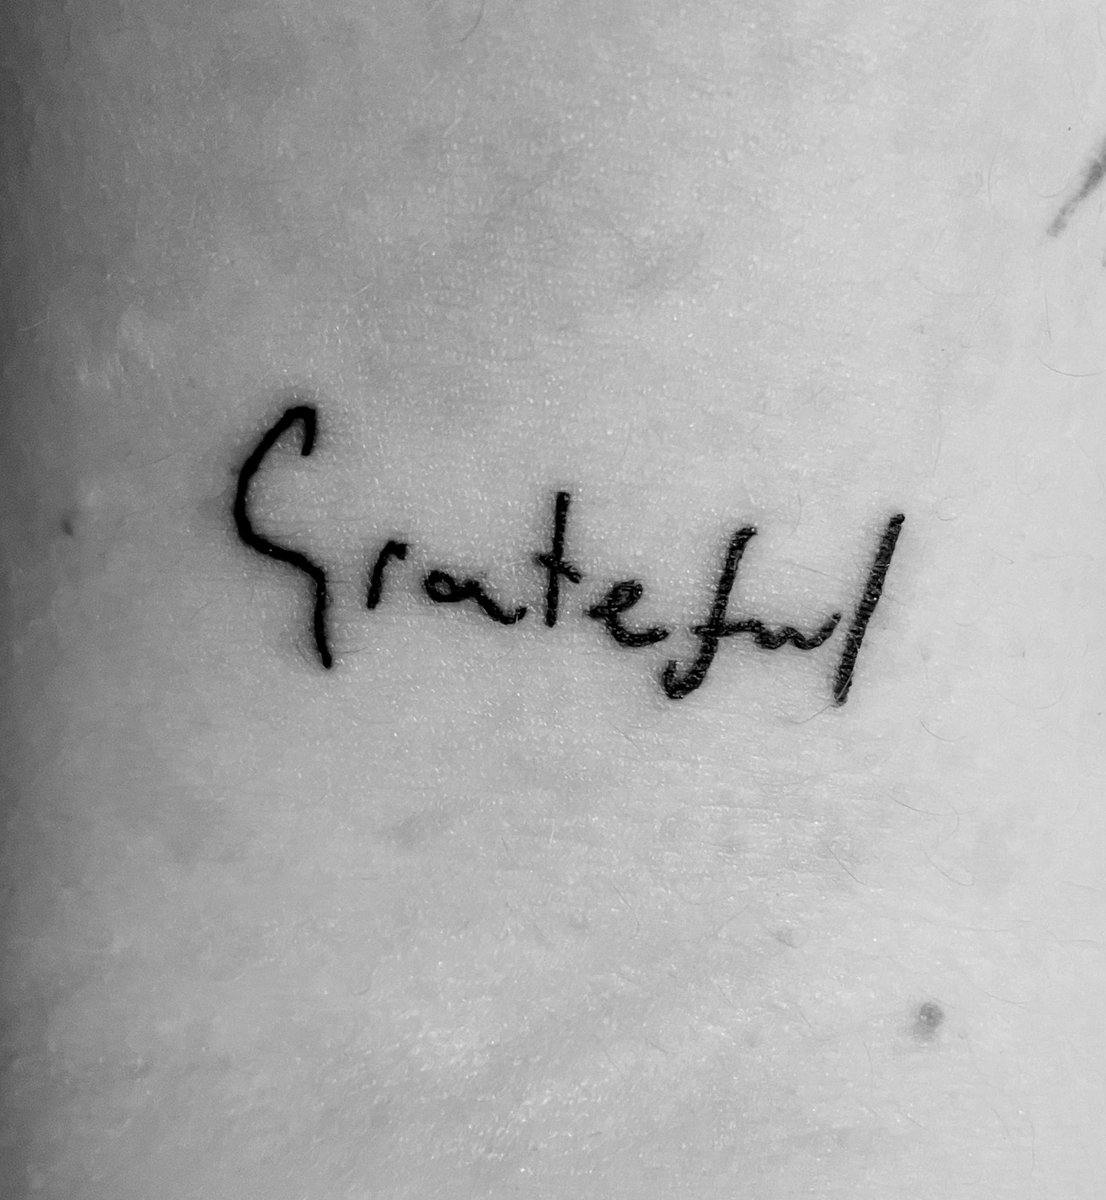 Got myself some new tattoos! 1 for fun & a reminder to stay weird! The other straight from a handwritten @BlueRoseCode set list at a gig that’s stuck with me for all the right reasons. “…the song is a celebration of the now, of love, of fellowship, of gratitude.” #Grateful